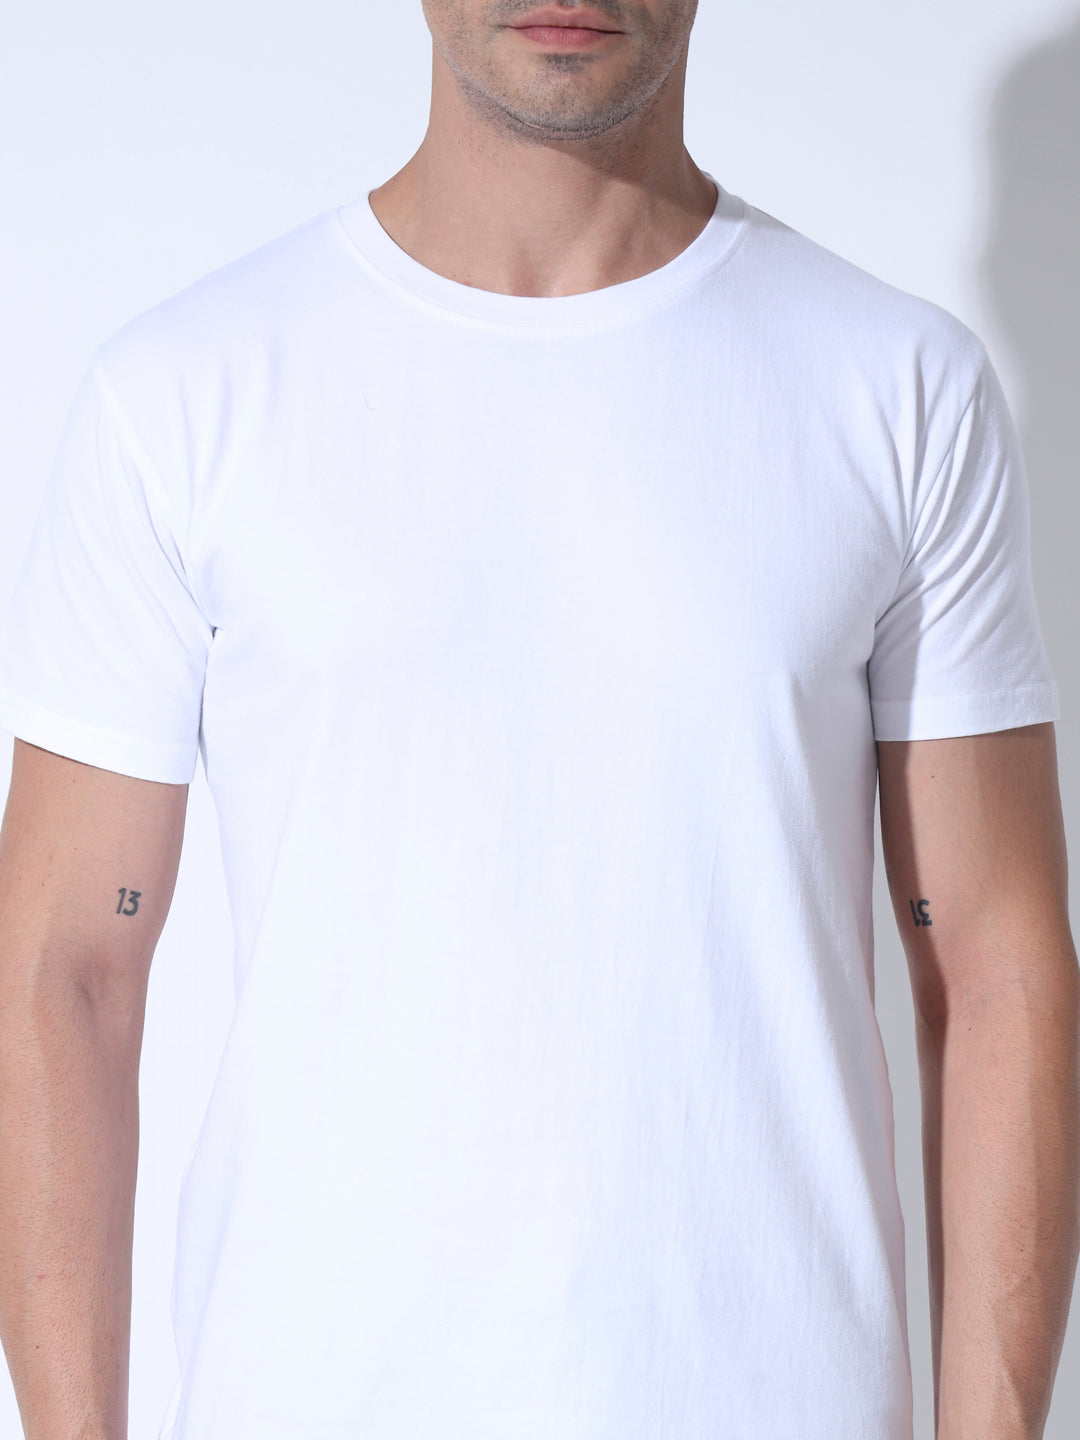 Soothing White Tee